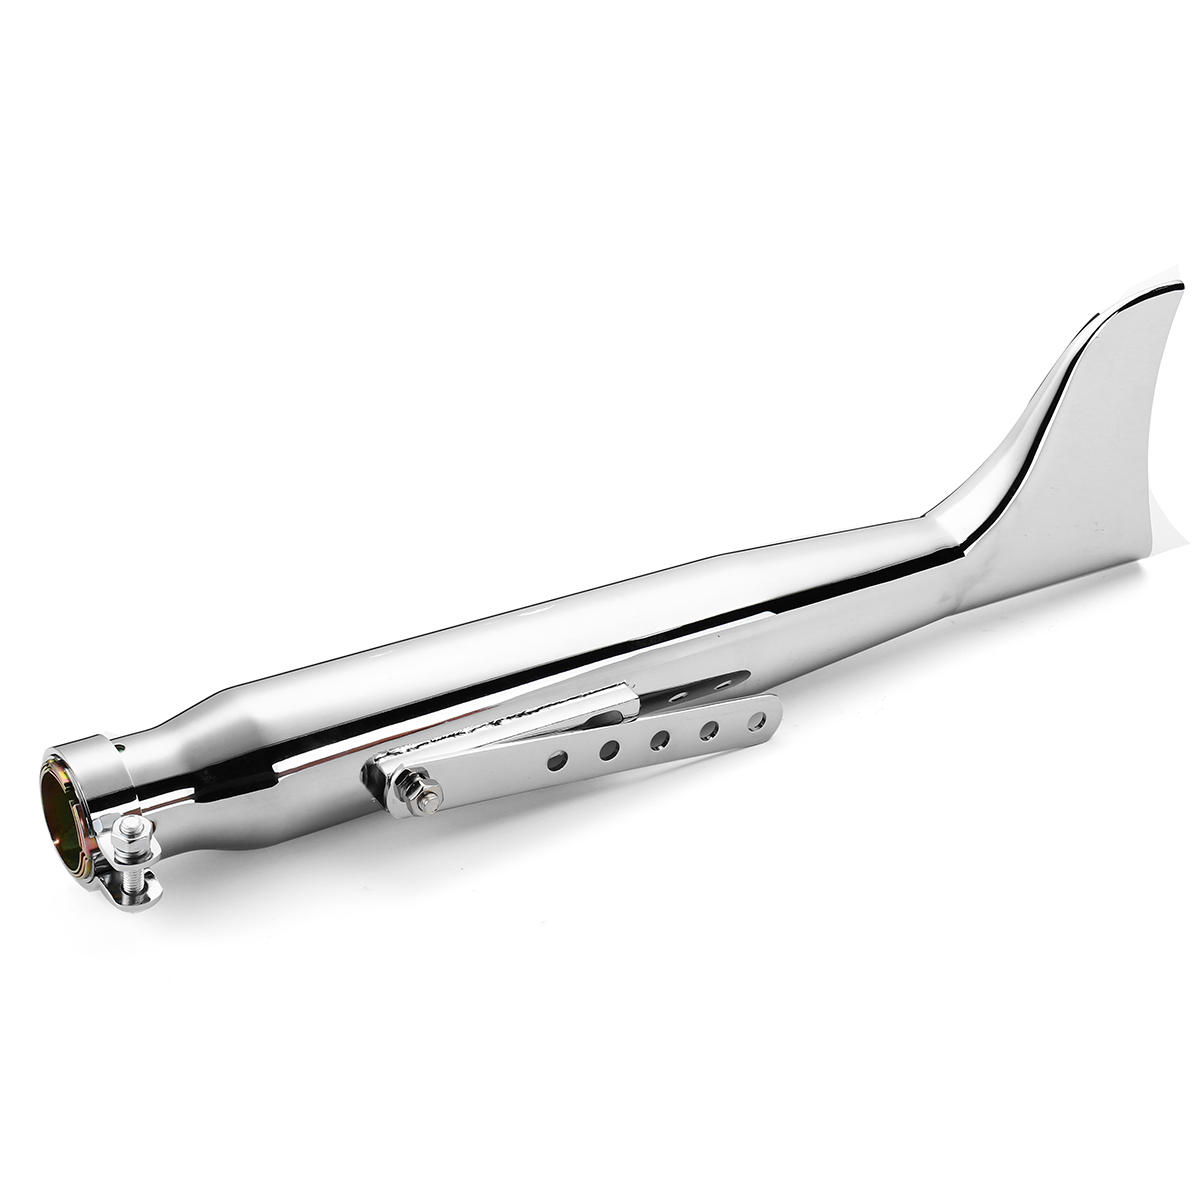 Image of Universal Motorcycle Fin Exhaust Muffler Pipe Silencer For Chopper Cafe Racer